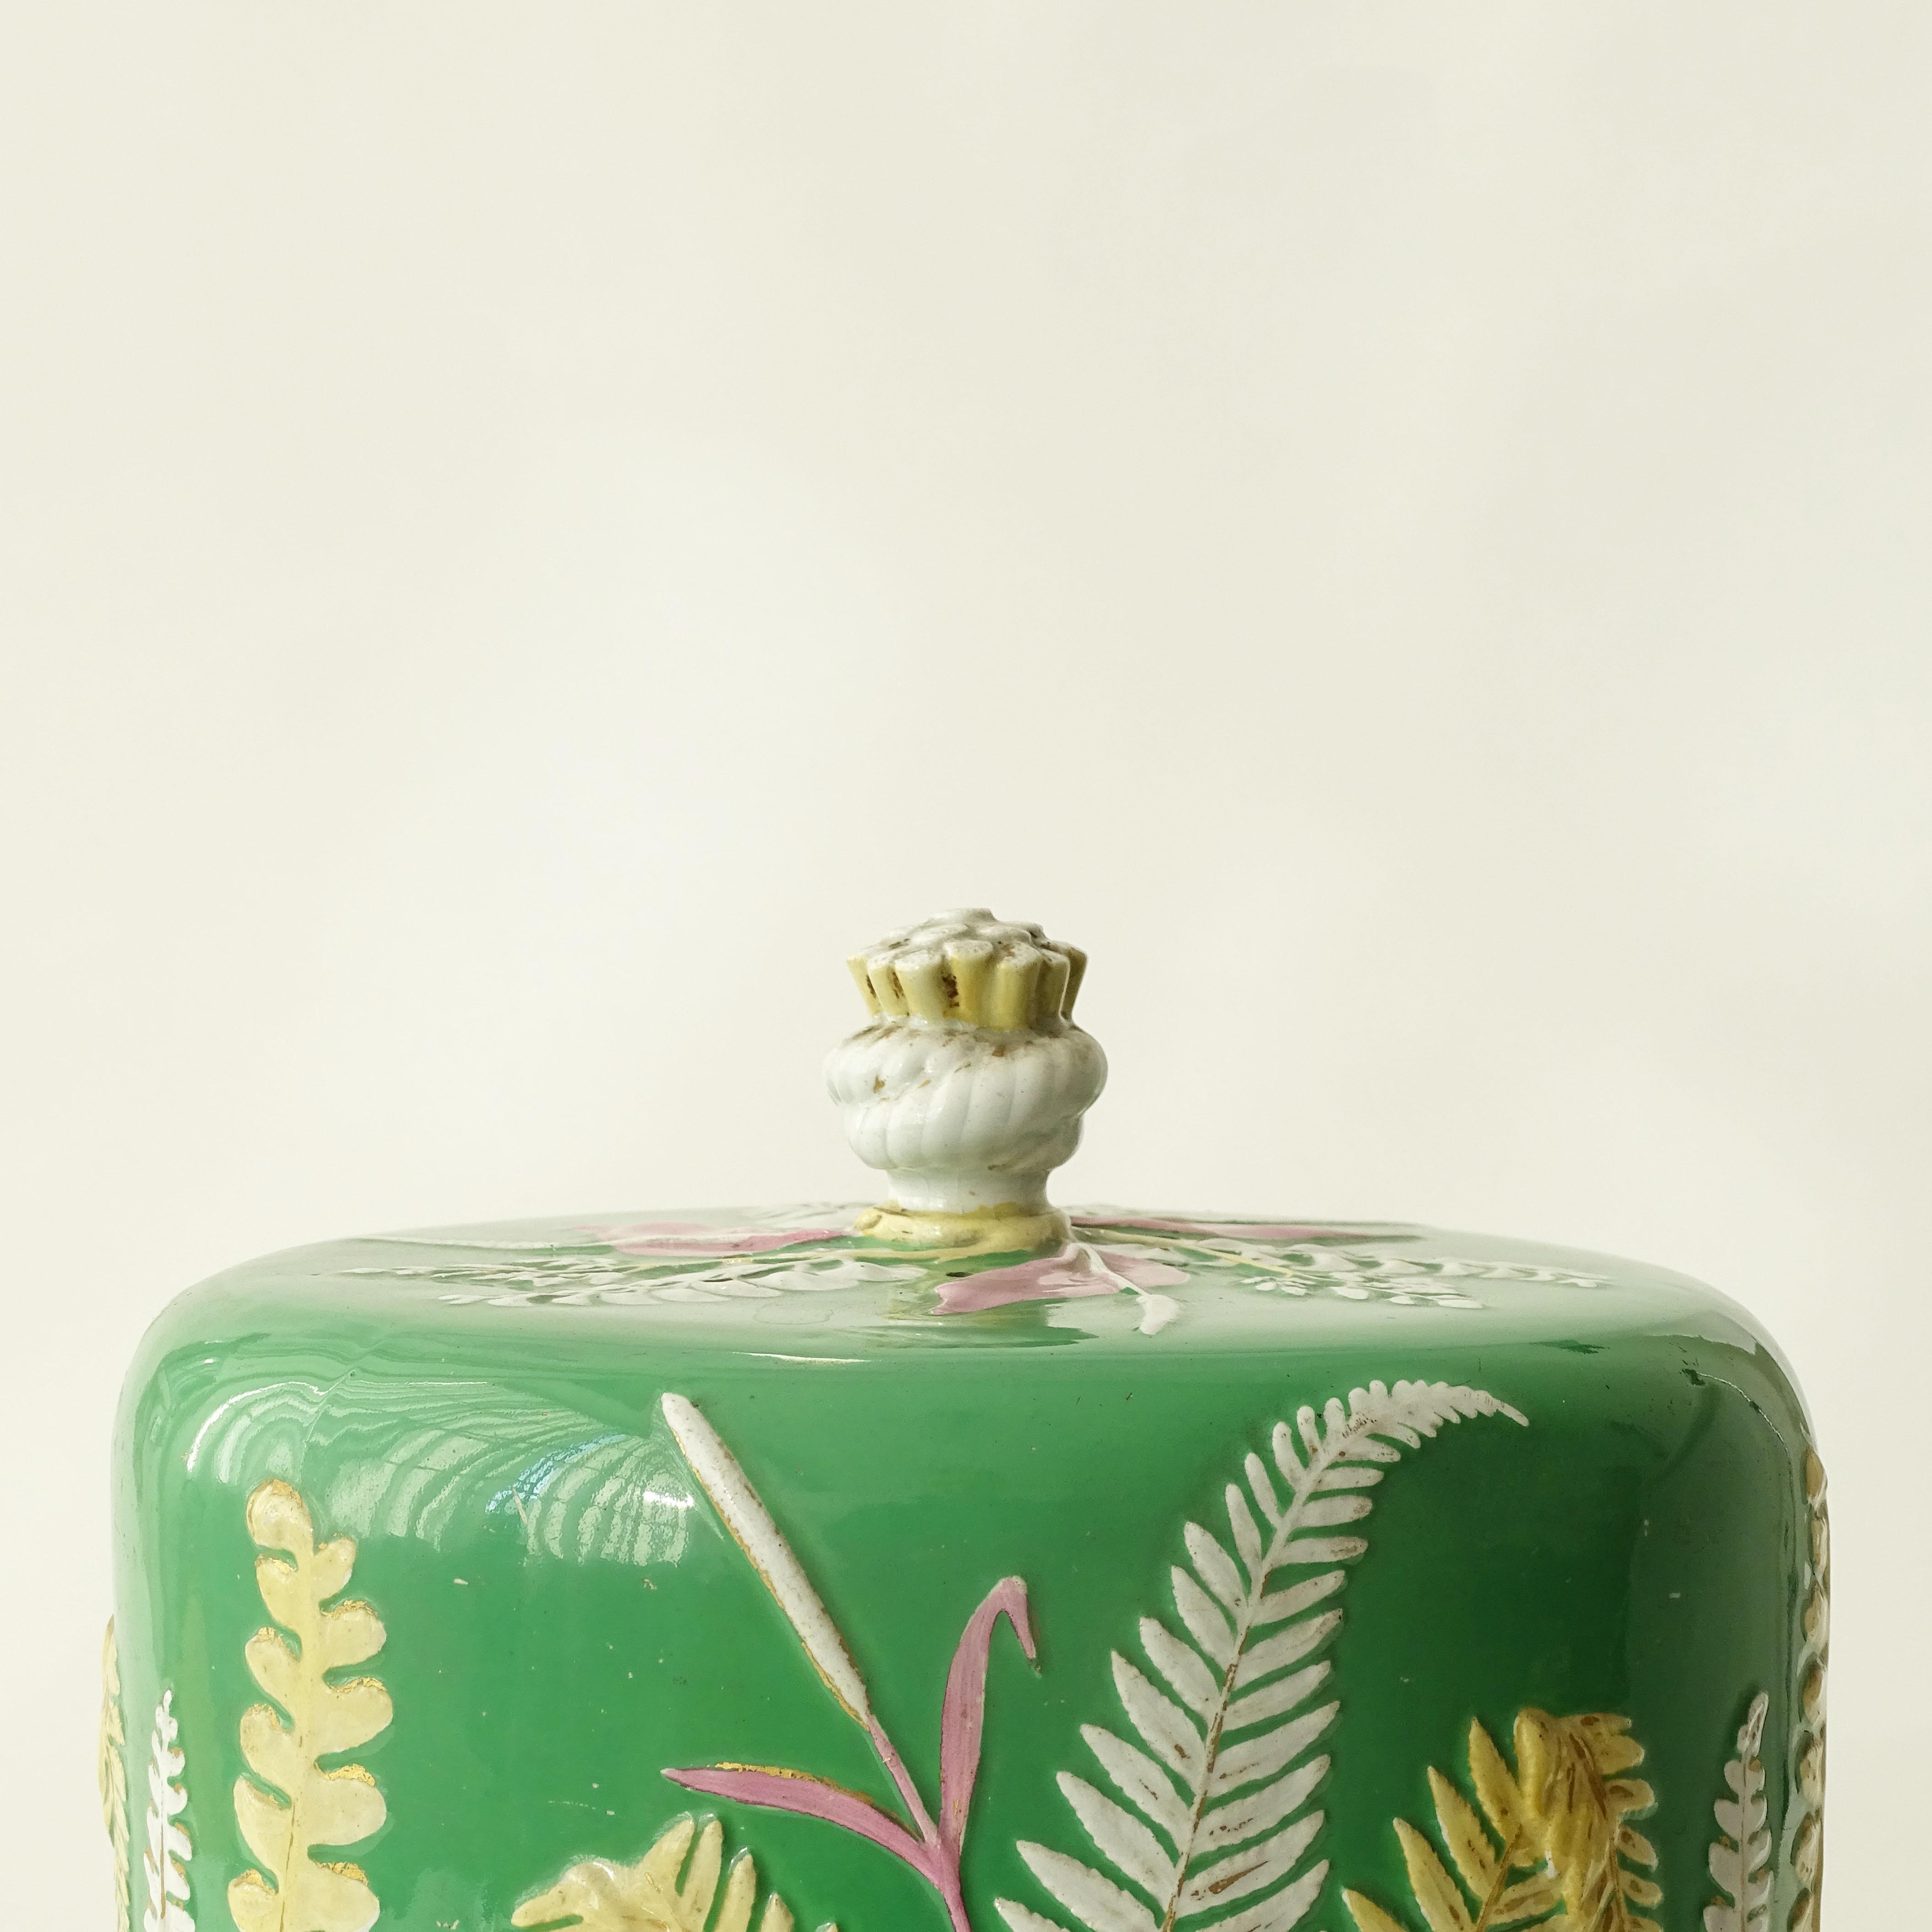 Dudson stoneware cheese dome and dish.
The dome is in a magnificent green decorated with low relief applied fern leaves and grasses in white, yellow, and pink.
